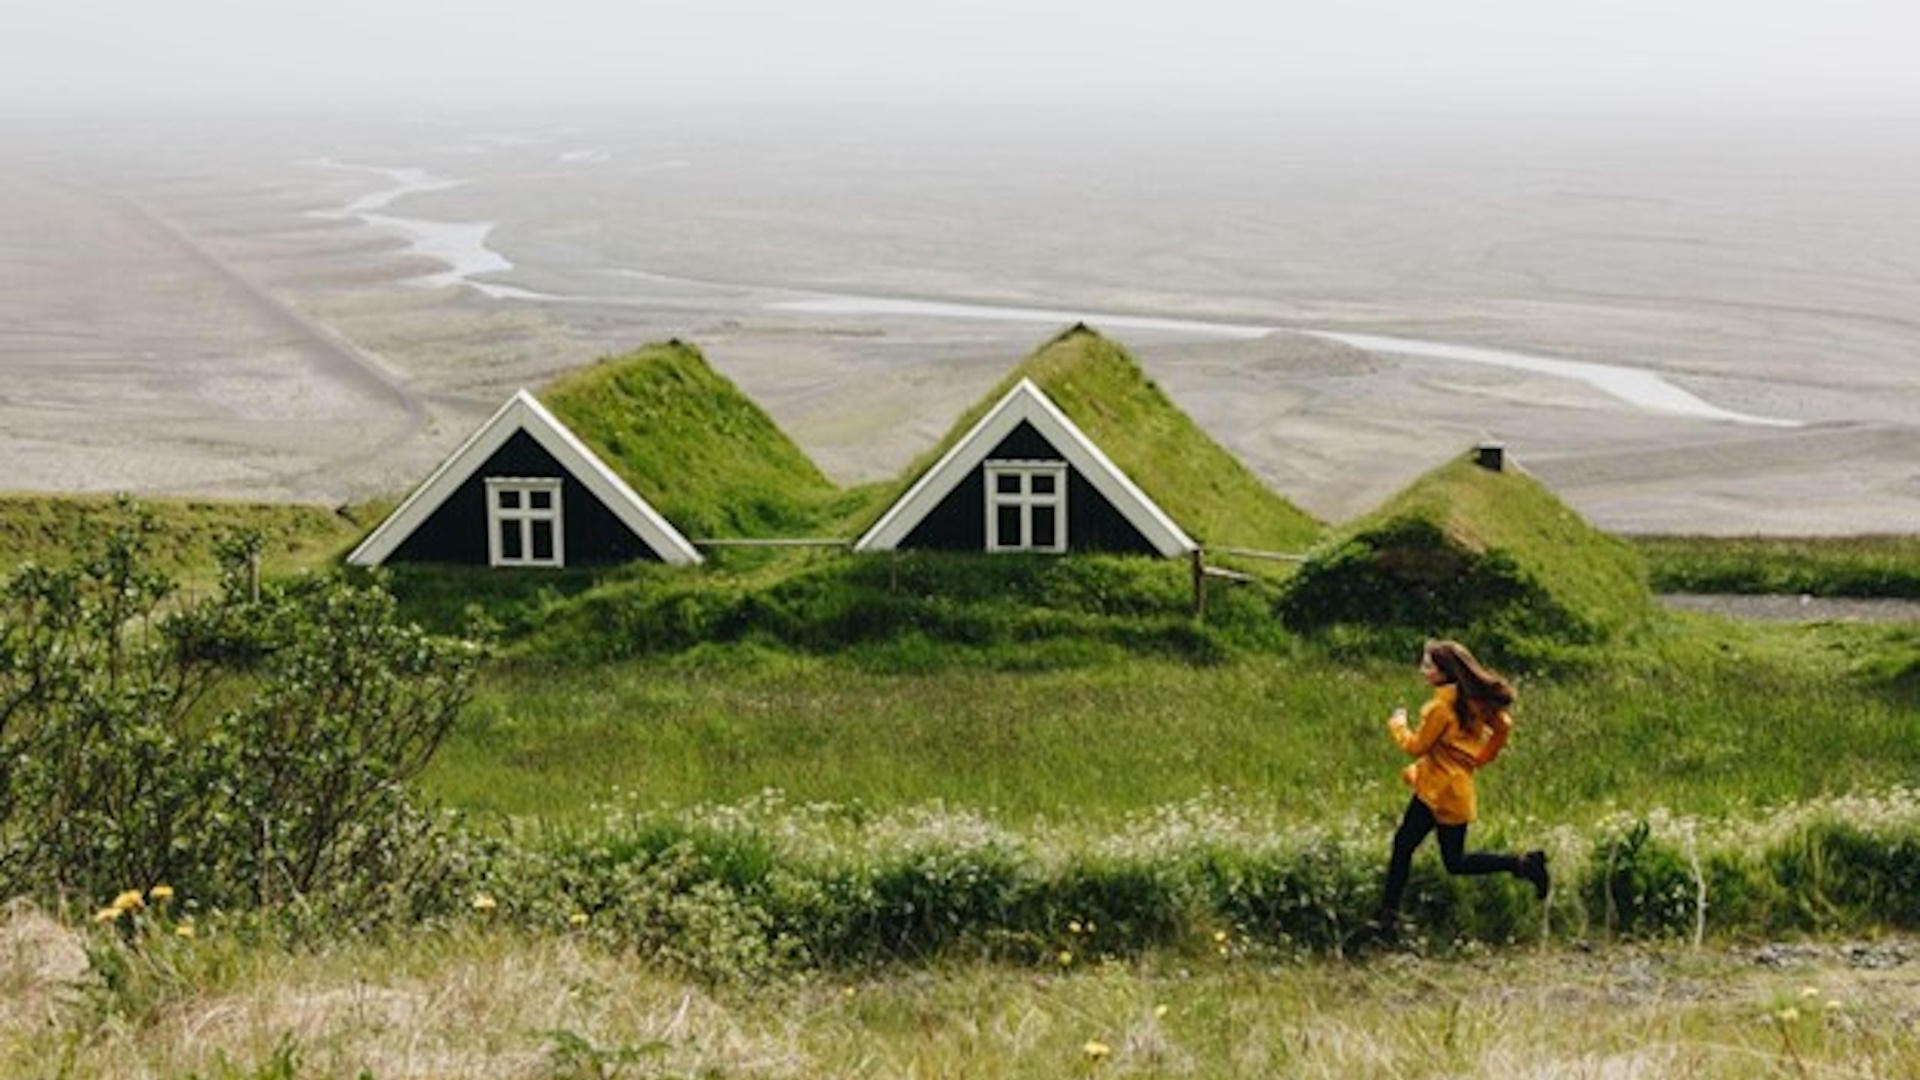 How to Become a Travel Photographer in 10 Simple Steps - House with Grass Roofs